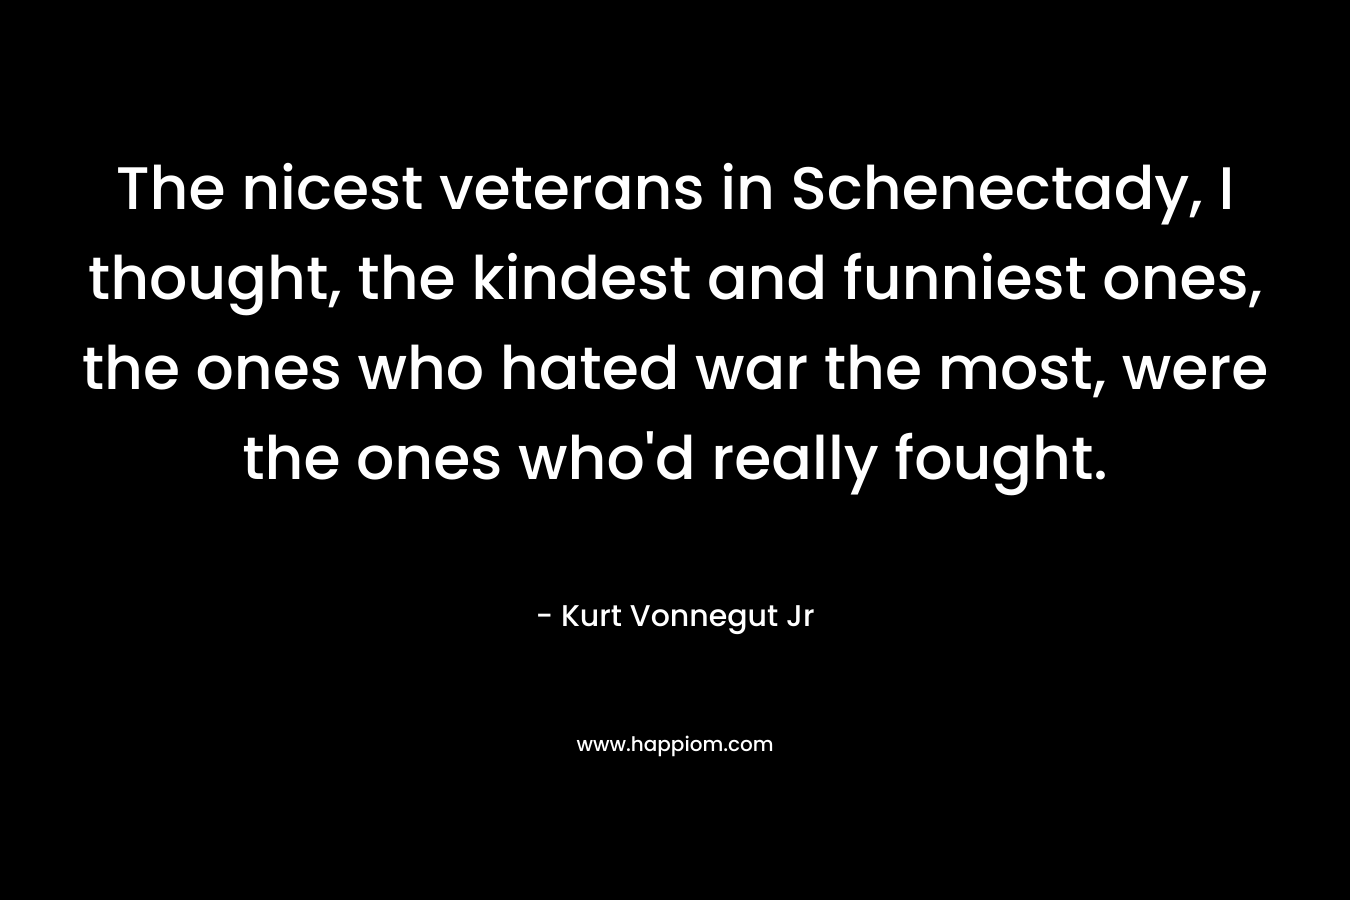 The nicest veterans in Schenectady, I thought, the kindest and funniest ones, the ones who hated war the most, were the ones who'd really fought.